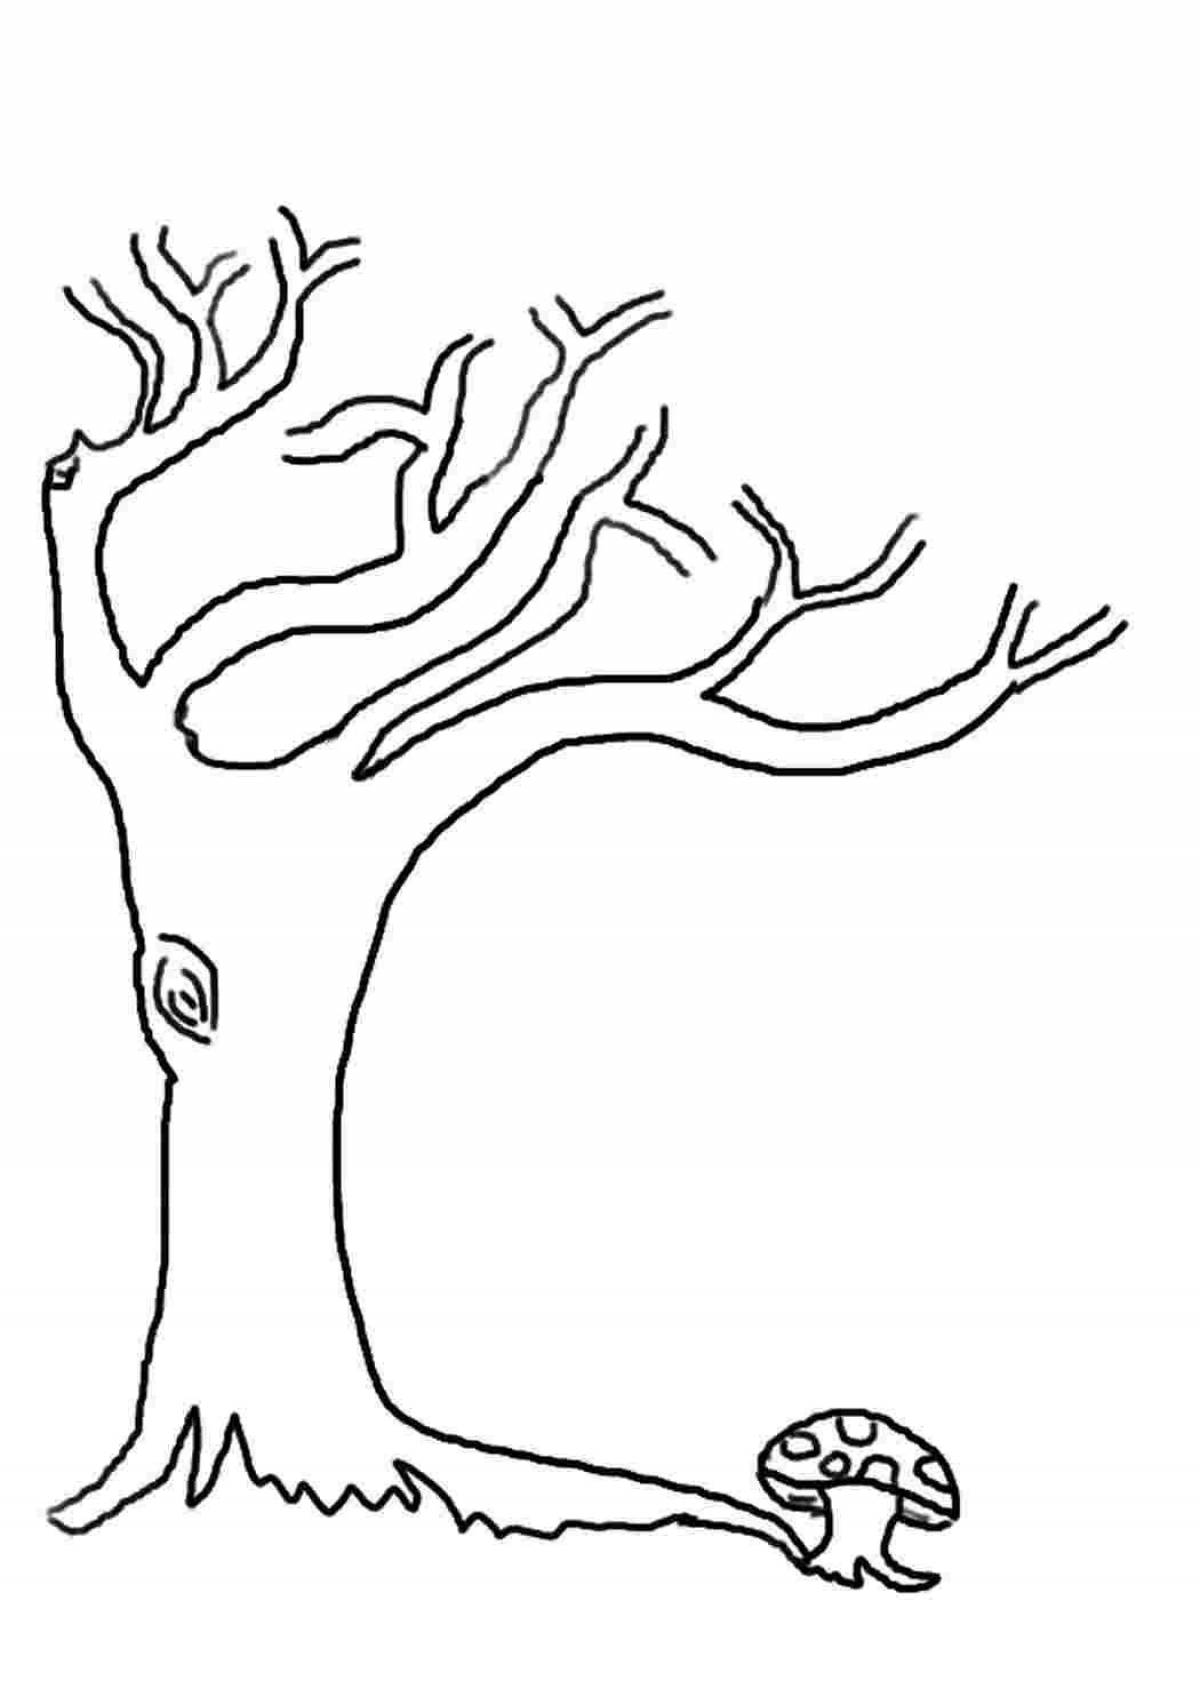 Great tree trunk coloring book